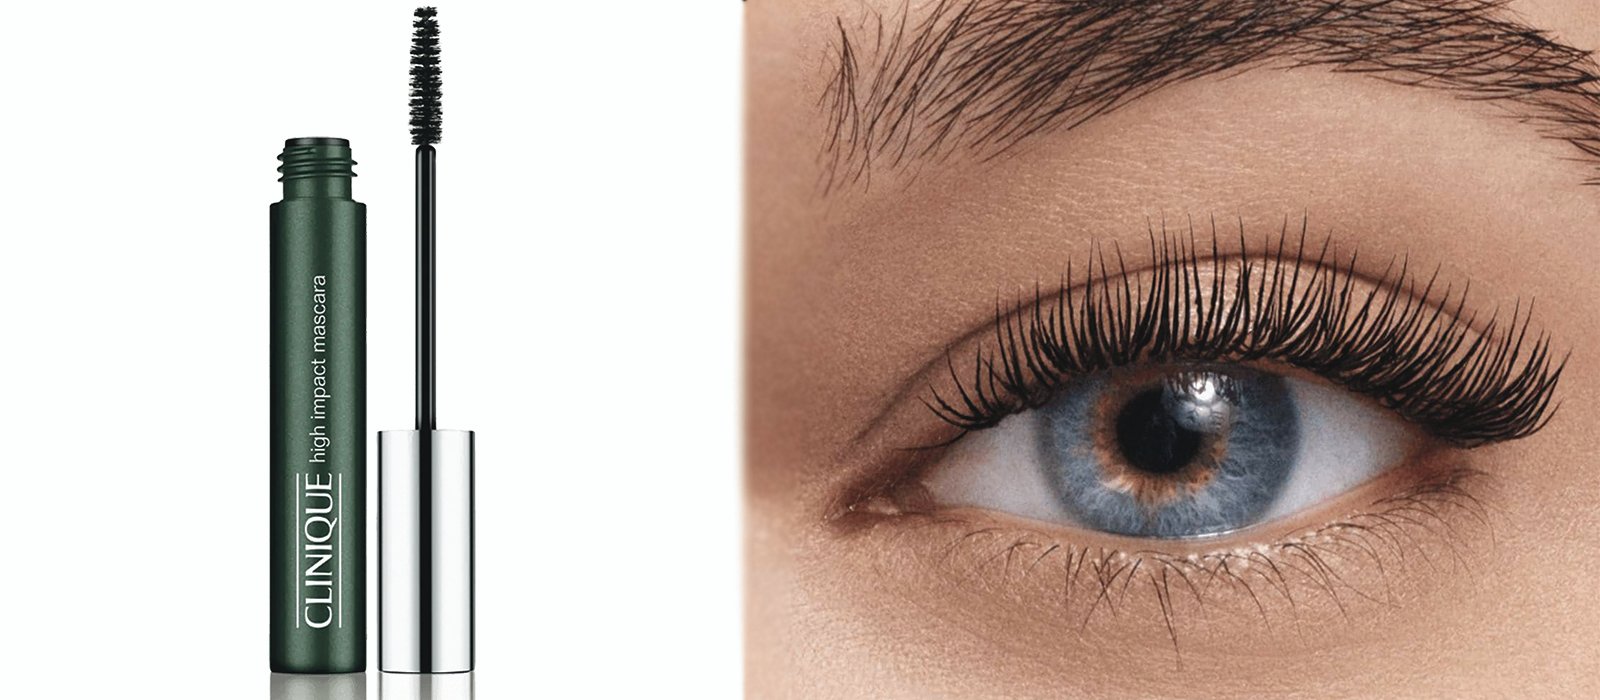 Looking For A Perfect Mascara? Read on to find out if Clinique's High Impact Mascara genuinely adds whack to build rich and full lashes